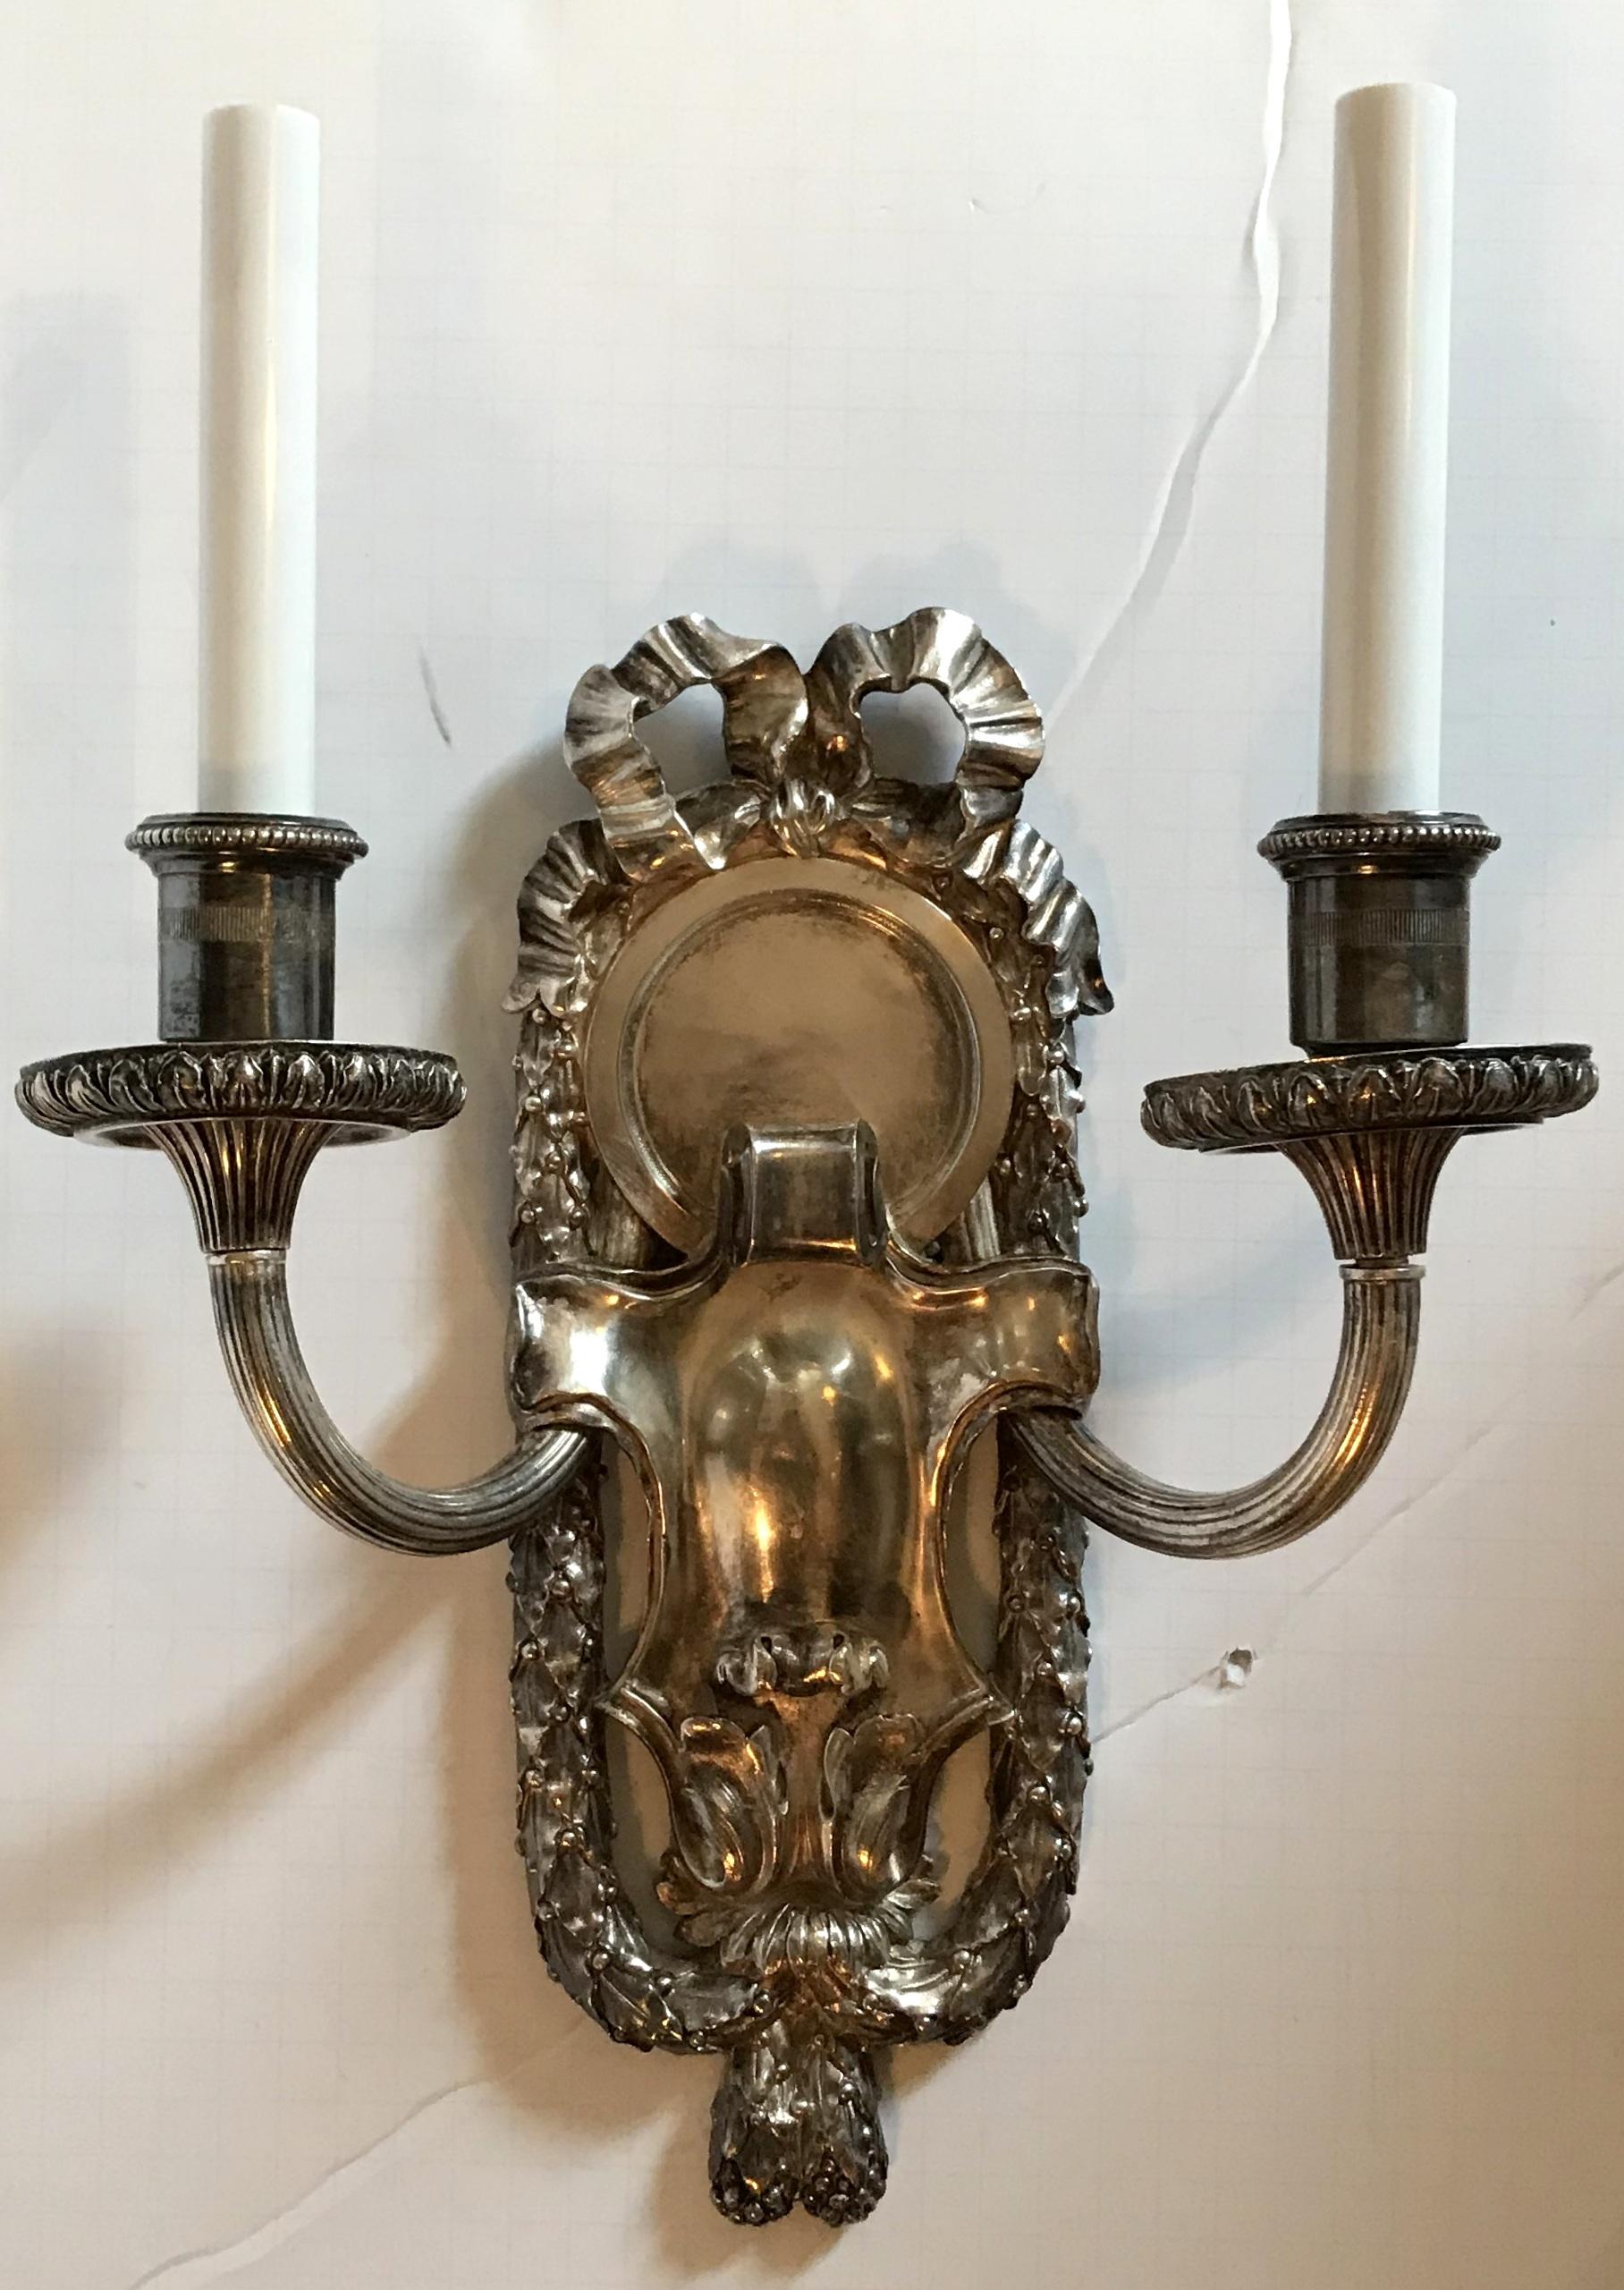 Elegant pair of E.F. Caldwell marked silvered nickel bronze sconces with embellished bow top and framed with filigree draping. With a softly aged gilt bronze patina, the sconces are set off with a wonderful centre medallion, the two fluted arms,